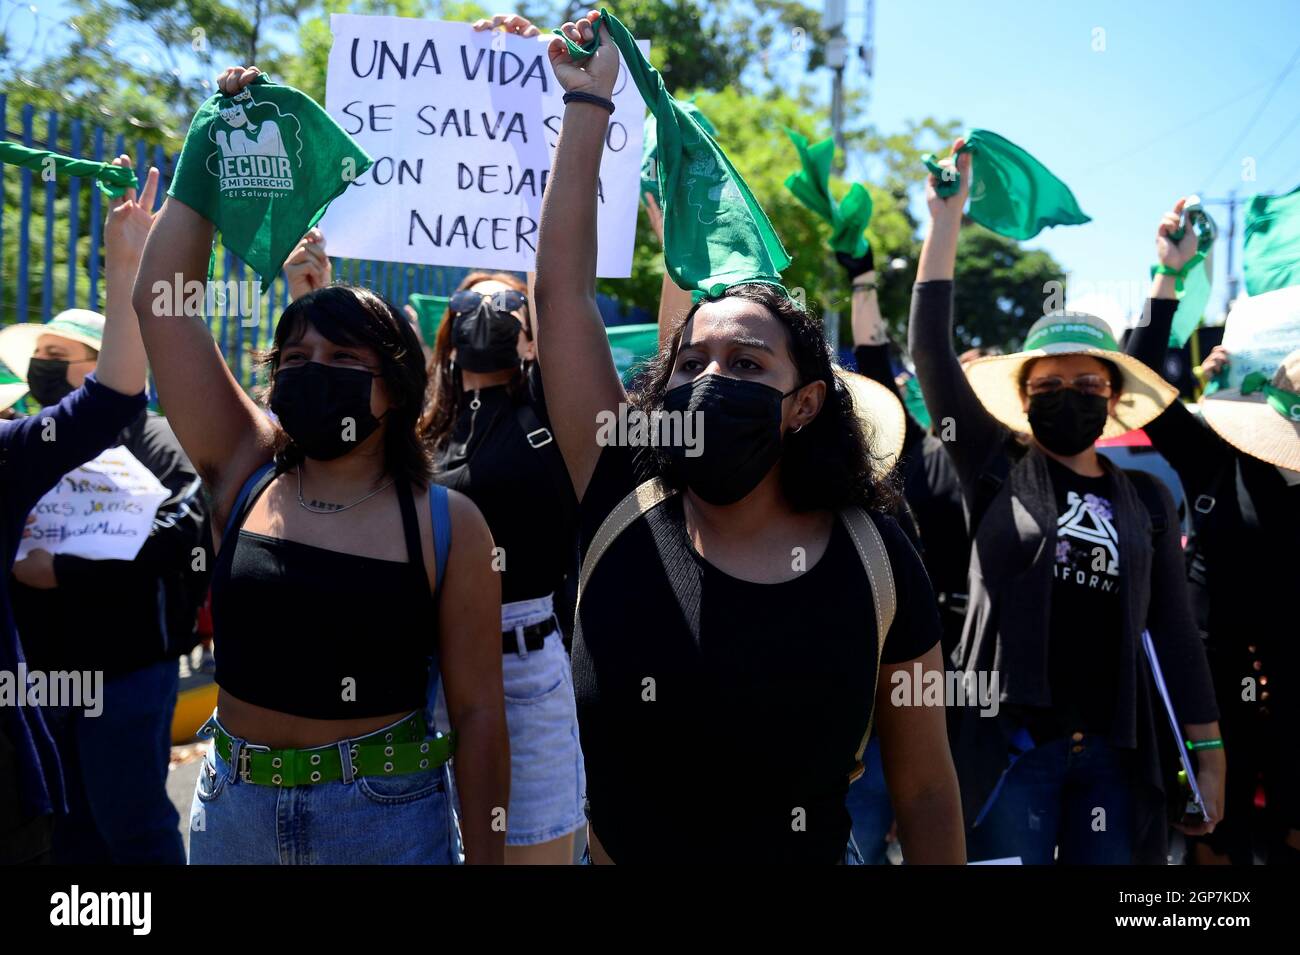 Women hold up green handkerchiefs, symbolizing the abortion rights movement, during a protest to mark International Safe Abortion Day in San Salvador, El Salvador, September 28, 2021. REUTERS/Jessica Orellana Stock Photo